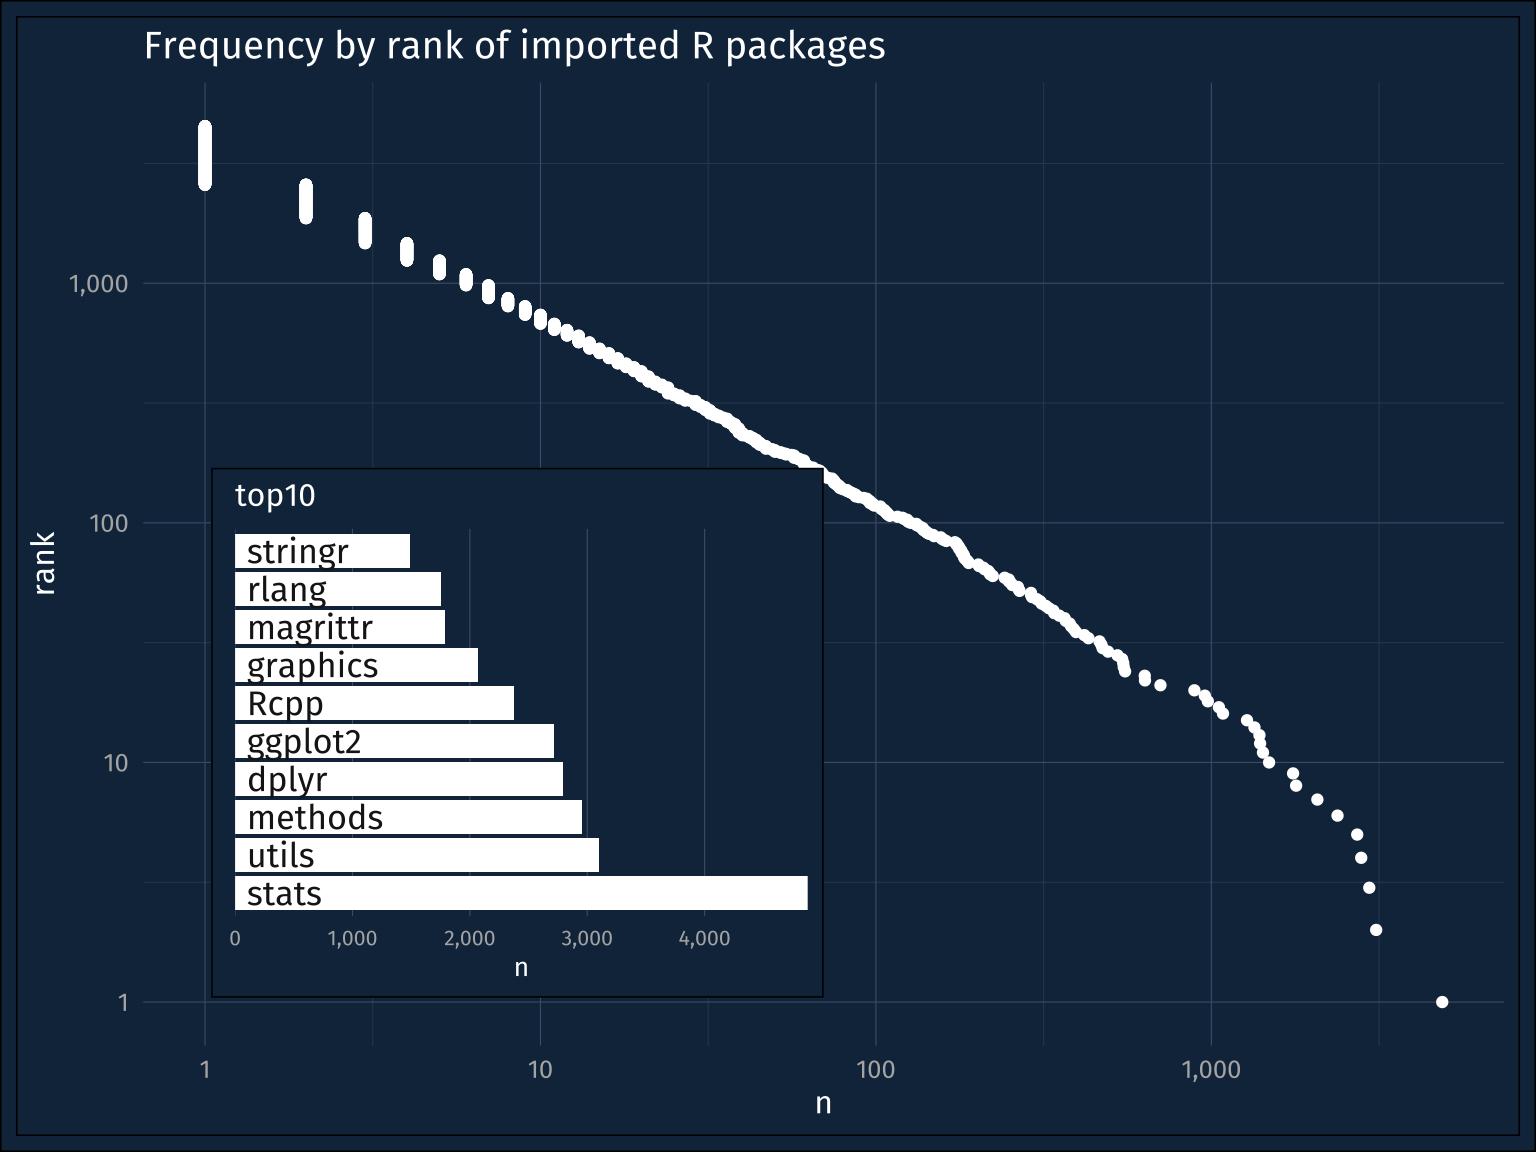 The main figure shows the linear decreasing relationship between log(frequency) and log(rank). The inset is a bar graph showing the import frequency of the top 10 packages, which are stats, utils, methods, dplyr, ggplot2, Rcpp, graphics, magrittr, rlang, stringr